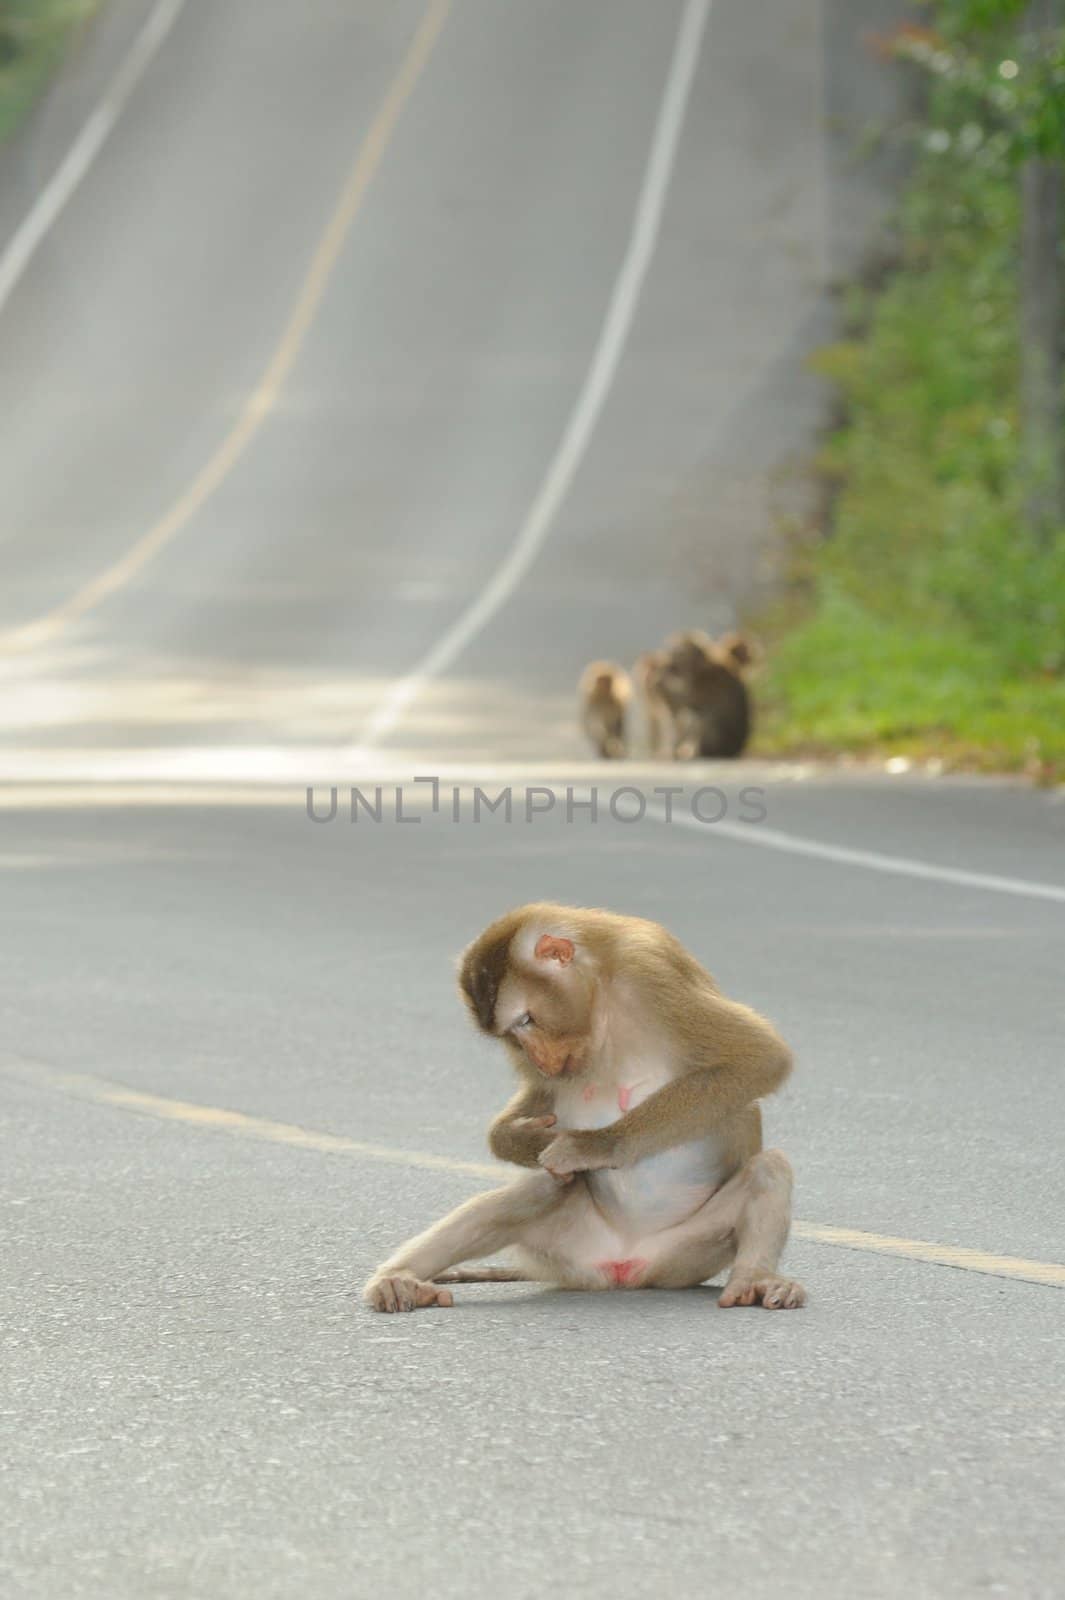 The monkeys relax on the road in Khao Yai National Park, Thailand.